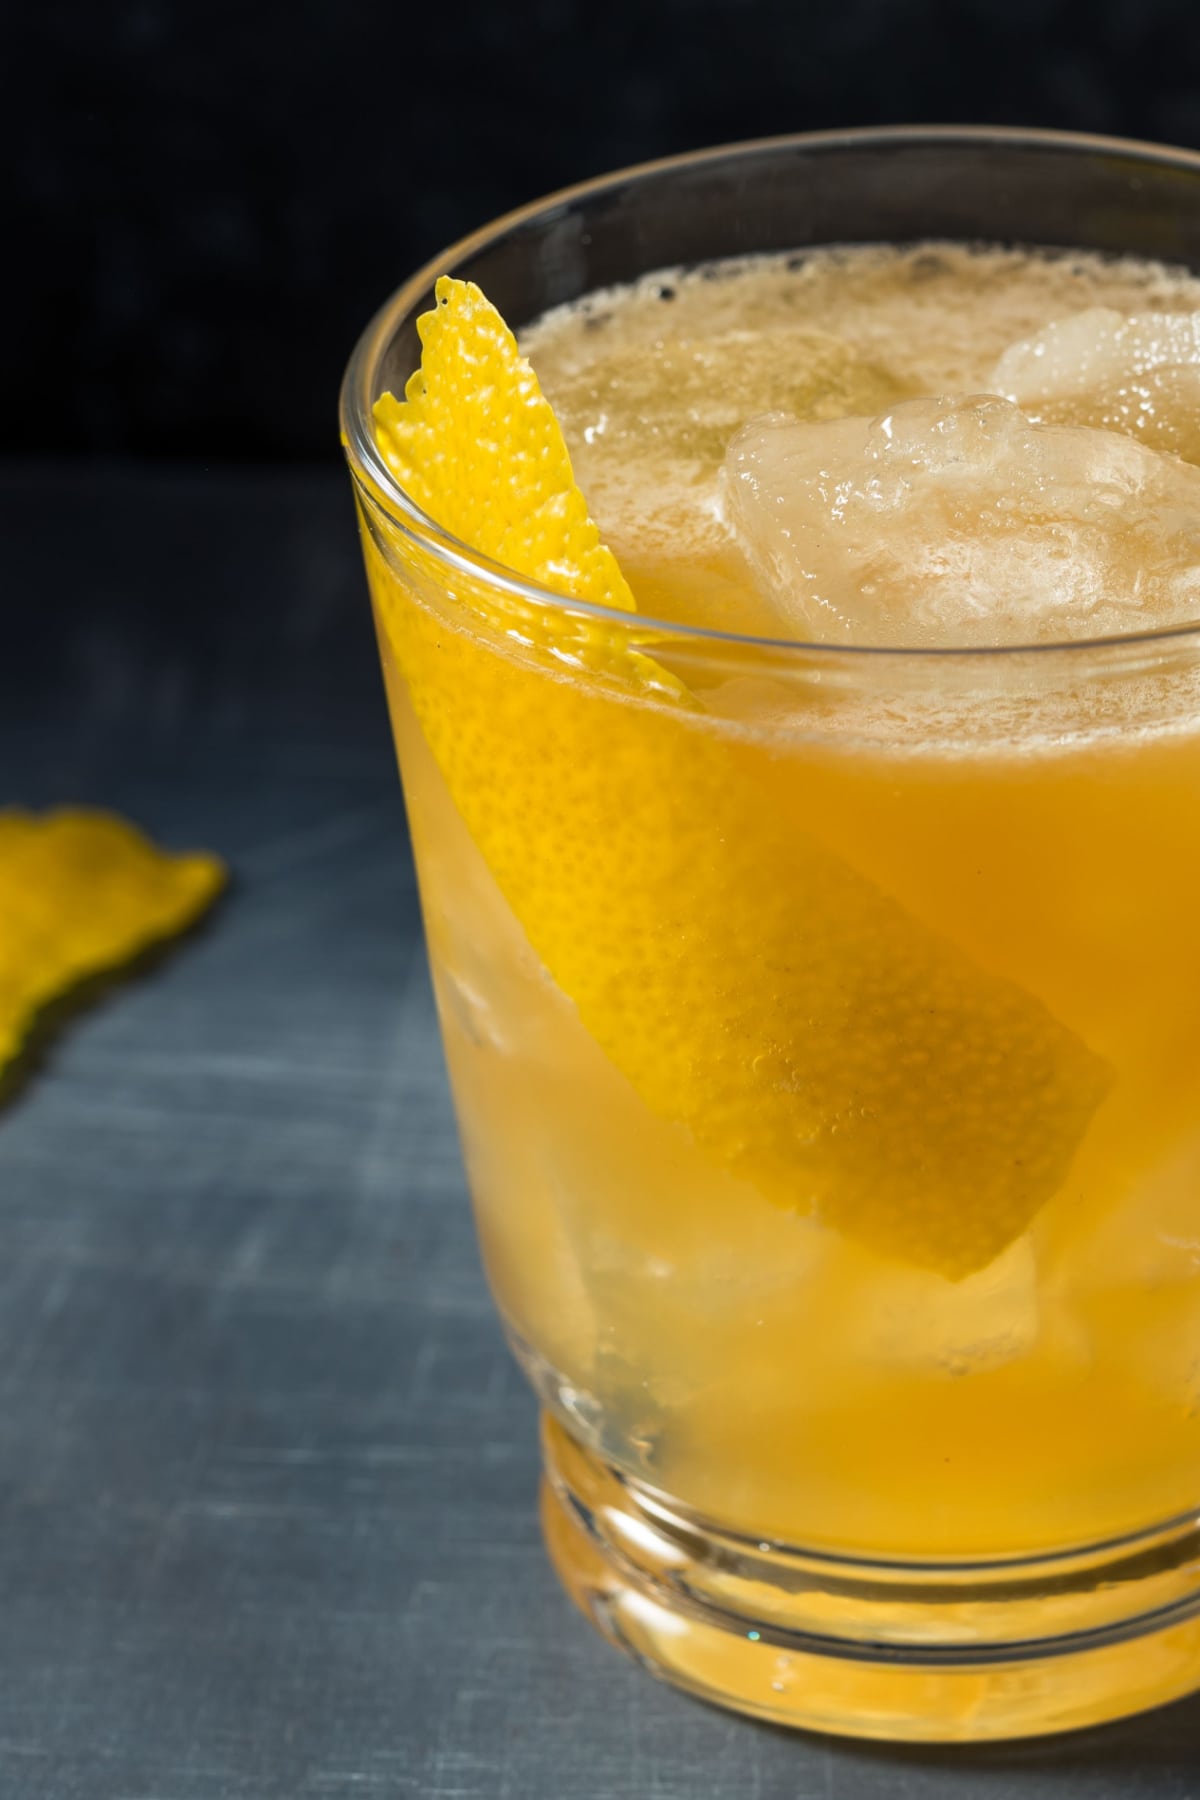 A glass of gold rush cocktail filled with ice garnished with lemon peel.